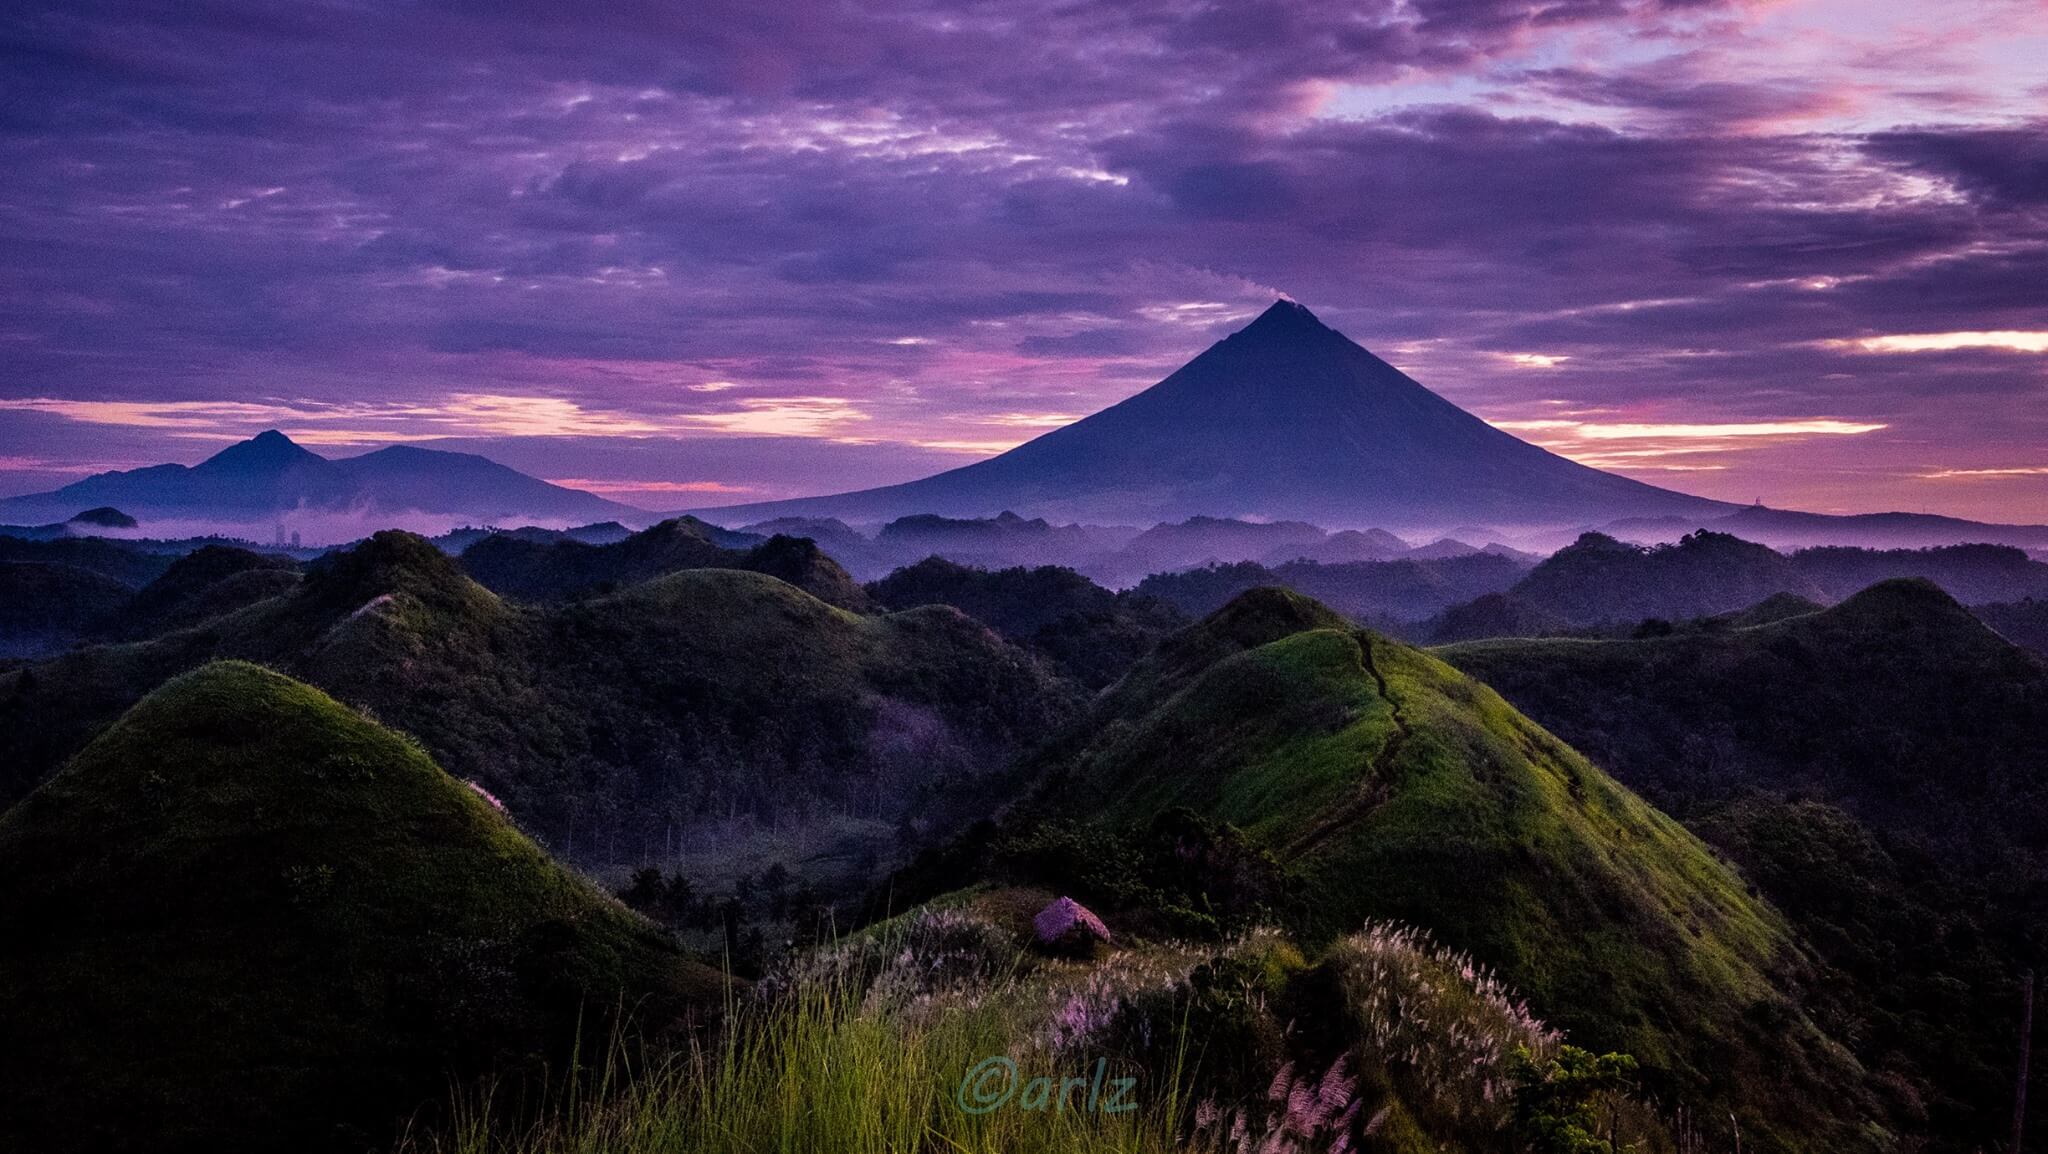 economic significance of mayon volcano tourism